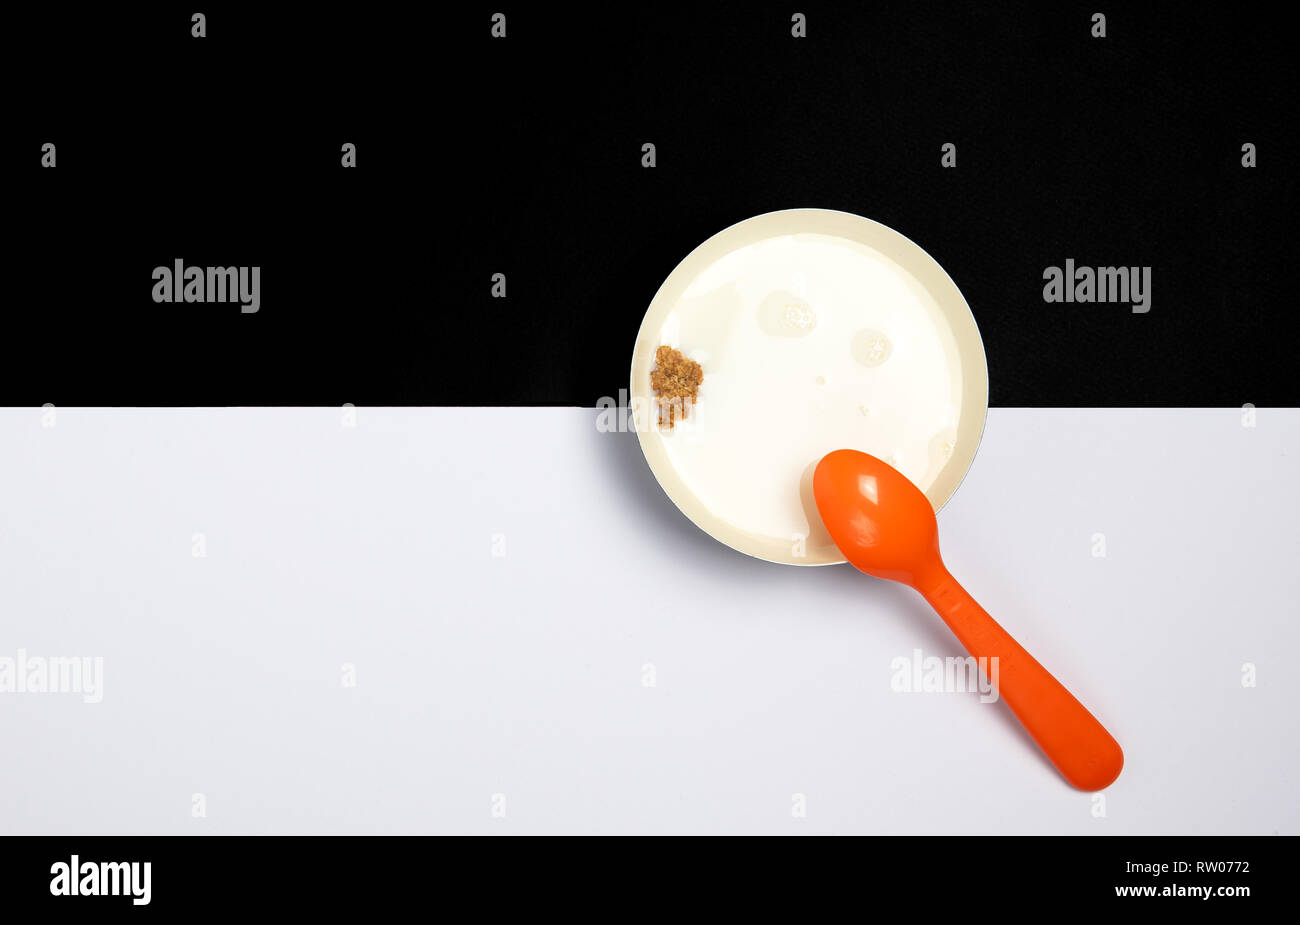 Ceramic bowl filled with milk and a piece of healthy cereal and an orange spoon on a black and white background. Concept of healthy breakfast Stock Photo